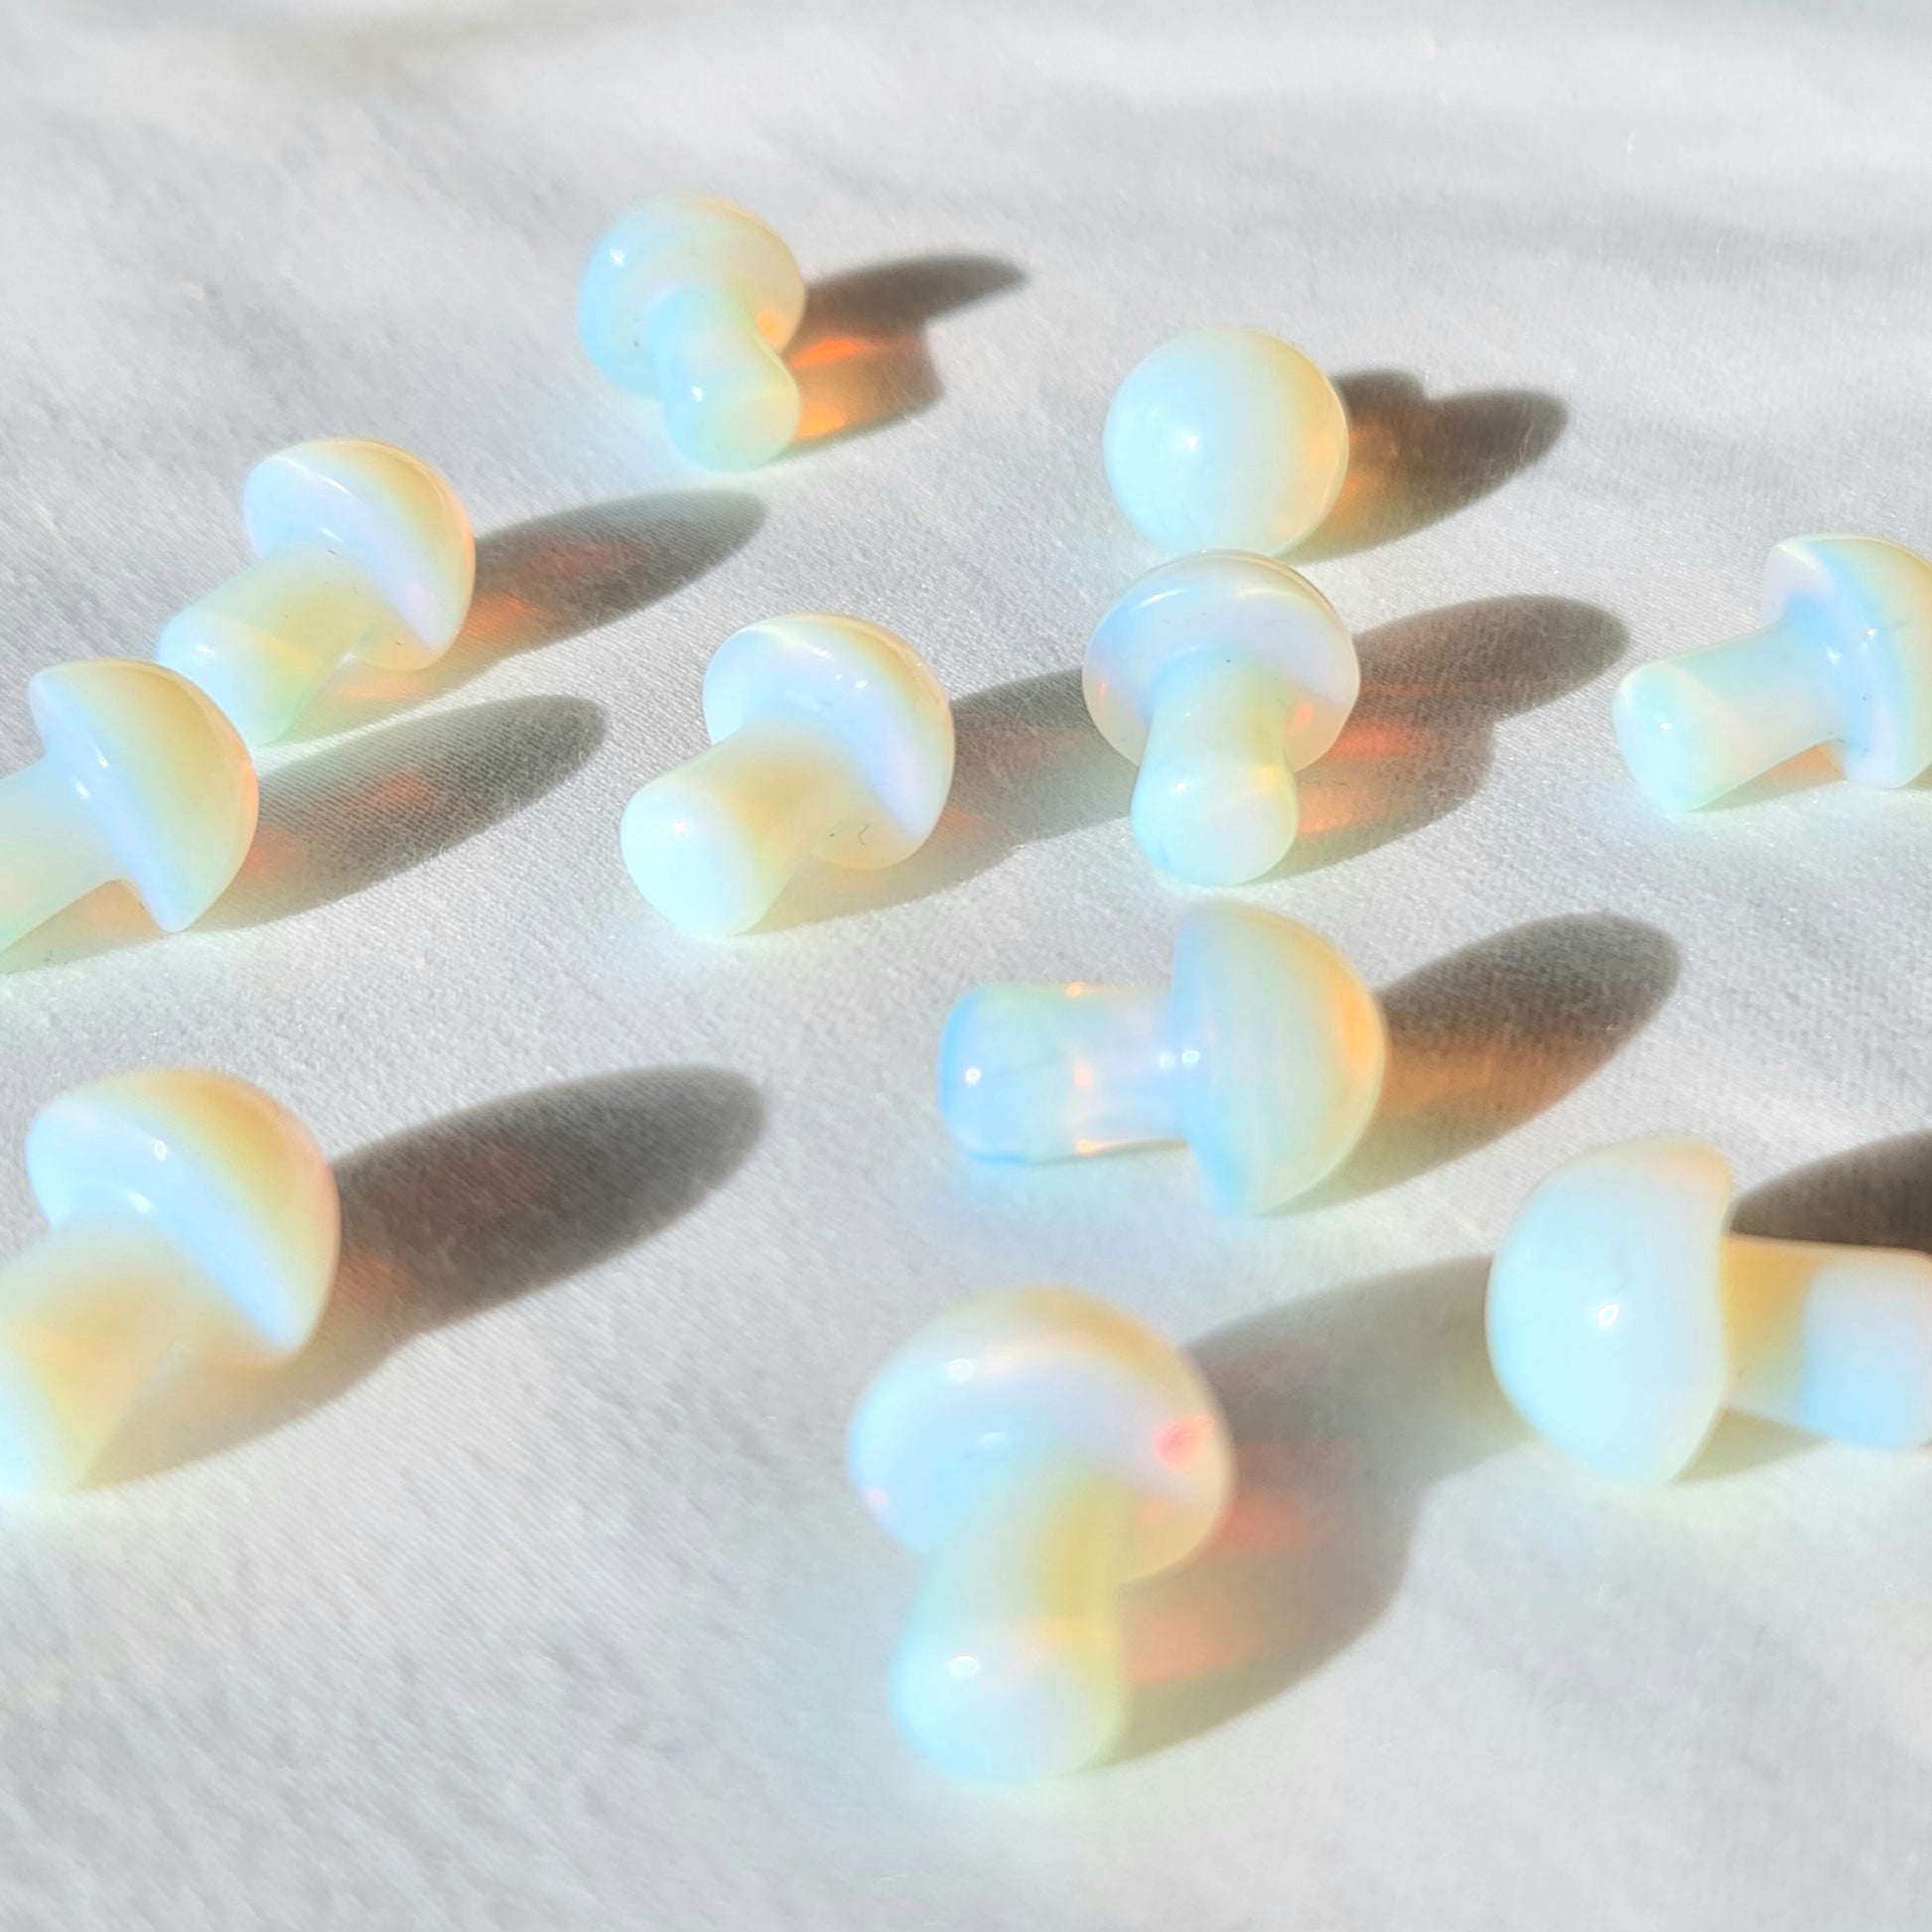 A photo of small crystal mushrooms made from opalite, a type of glass that resembles the iridescent play of colours found in natural opals. Each mushroom has a rounded cap and a short stem, and has been polished to a smooth and shiny finish. 